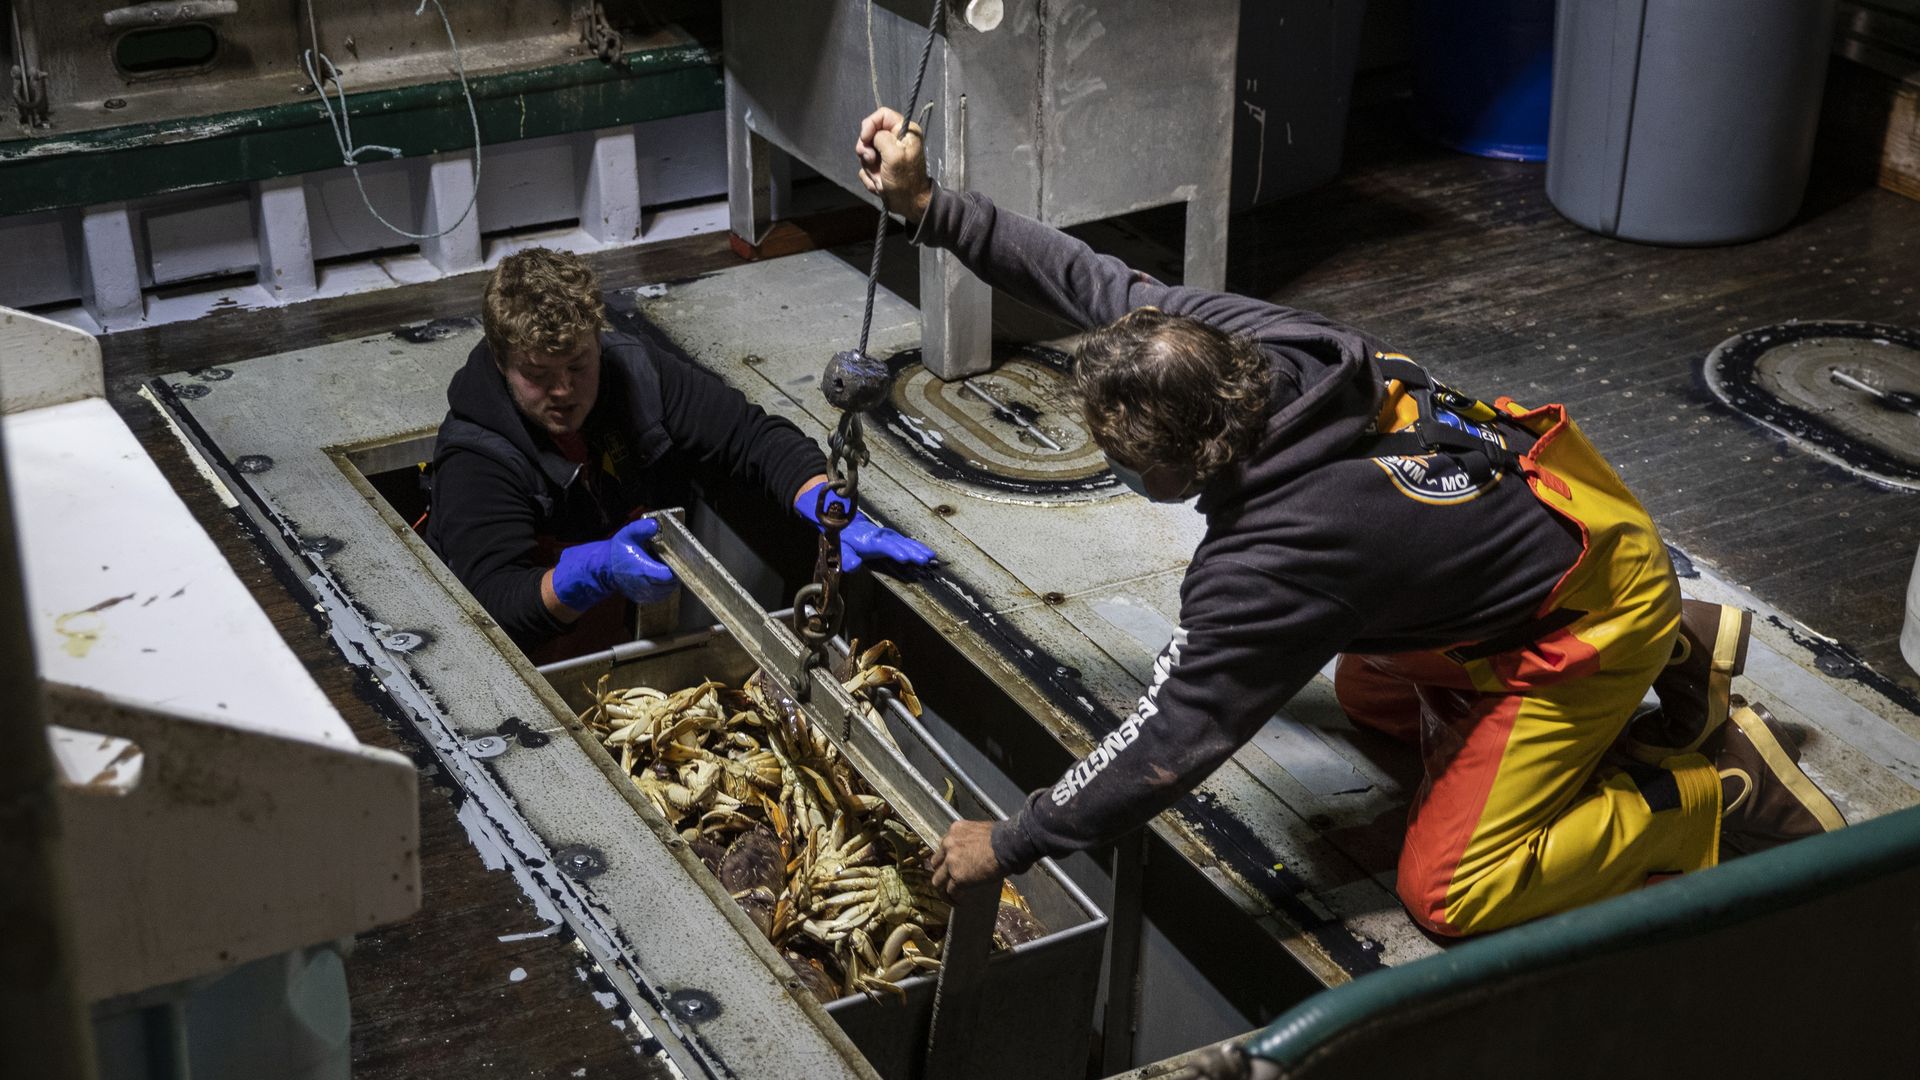 Commercial fisherman Bob Maharry, right, and deckhand Drake Hoffman guide a basket of Dungeness crabs on Pier 45 in San Francisco, California on March 18, 2021.